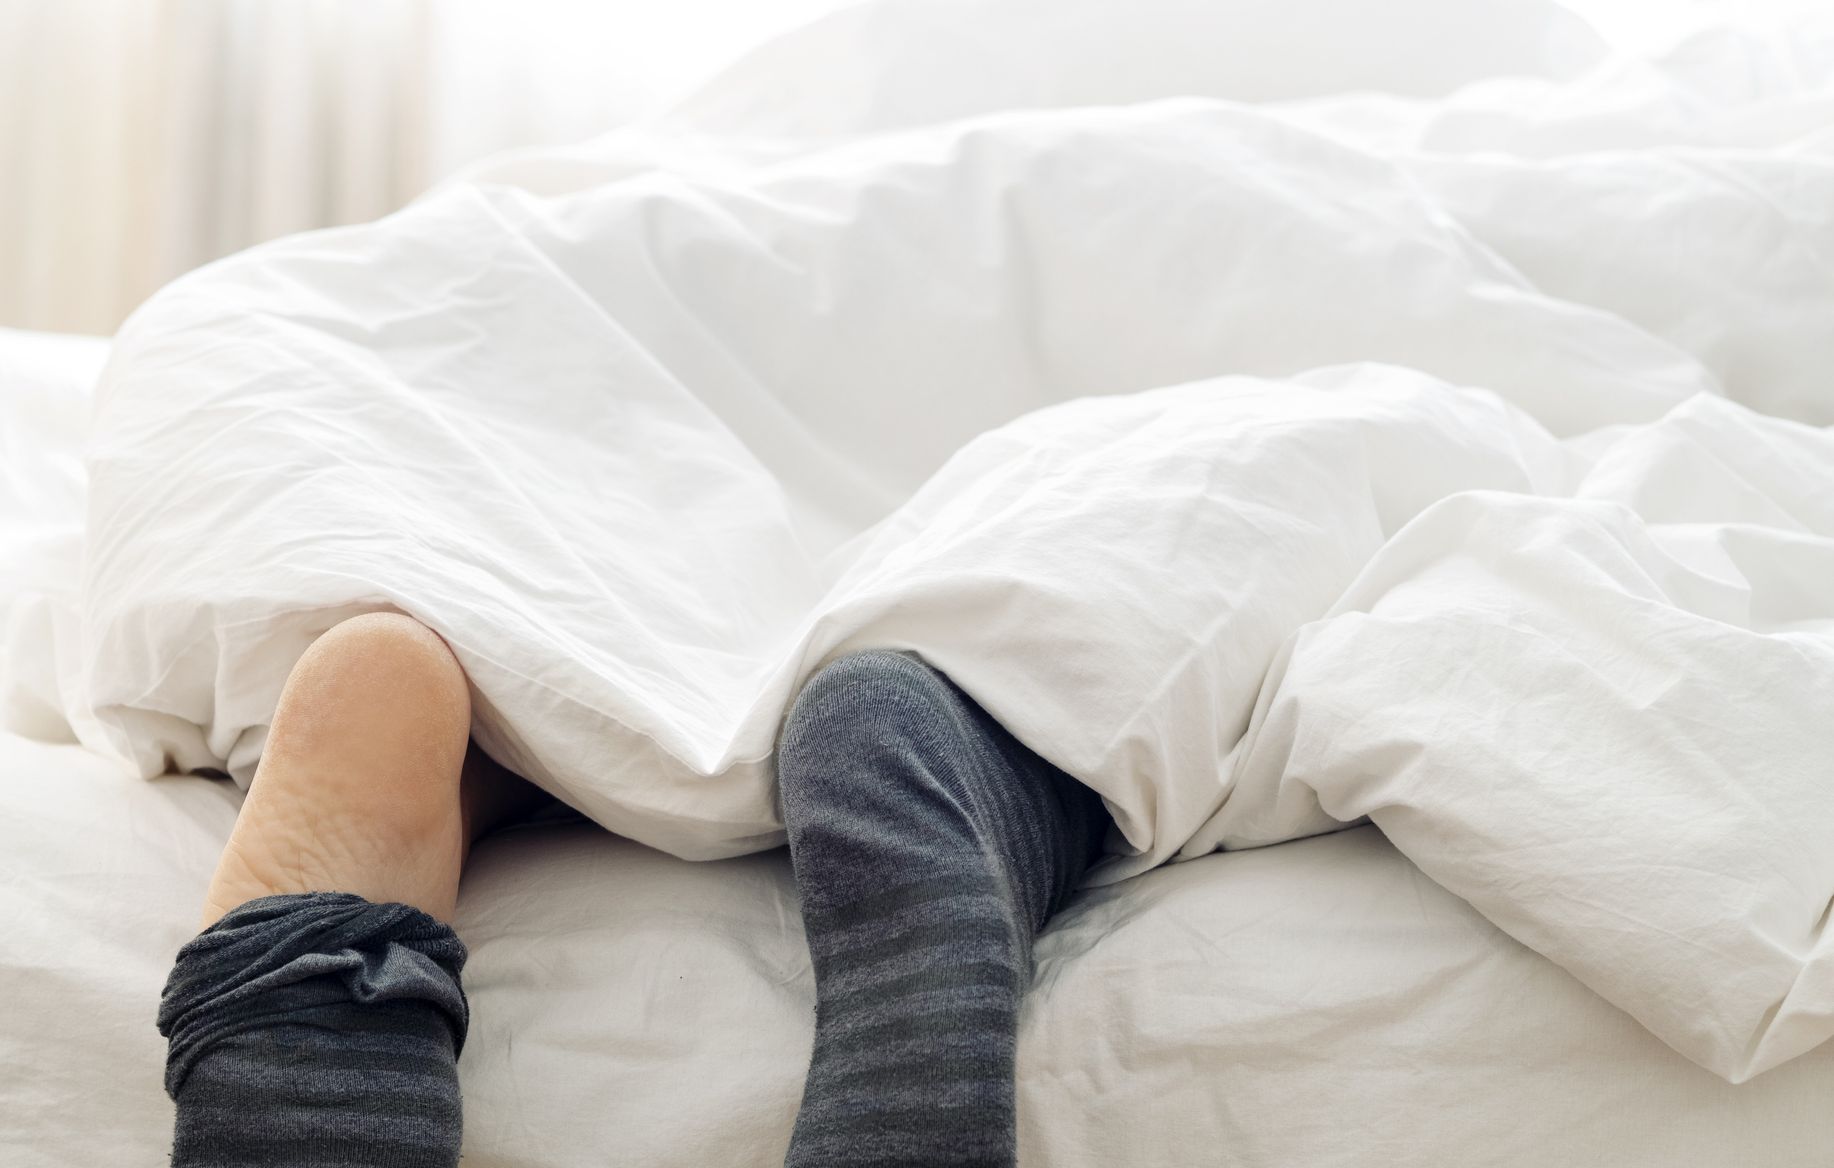 Wearing Socks in Bed Could Help You Sleep Better, Says NHS Doctor